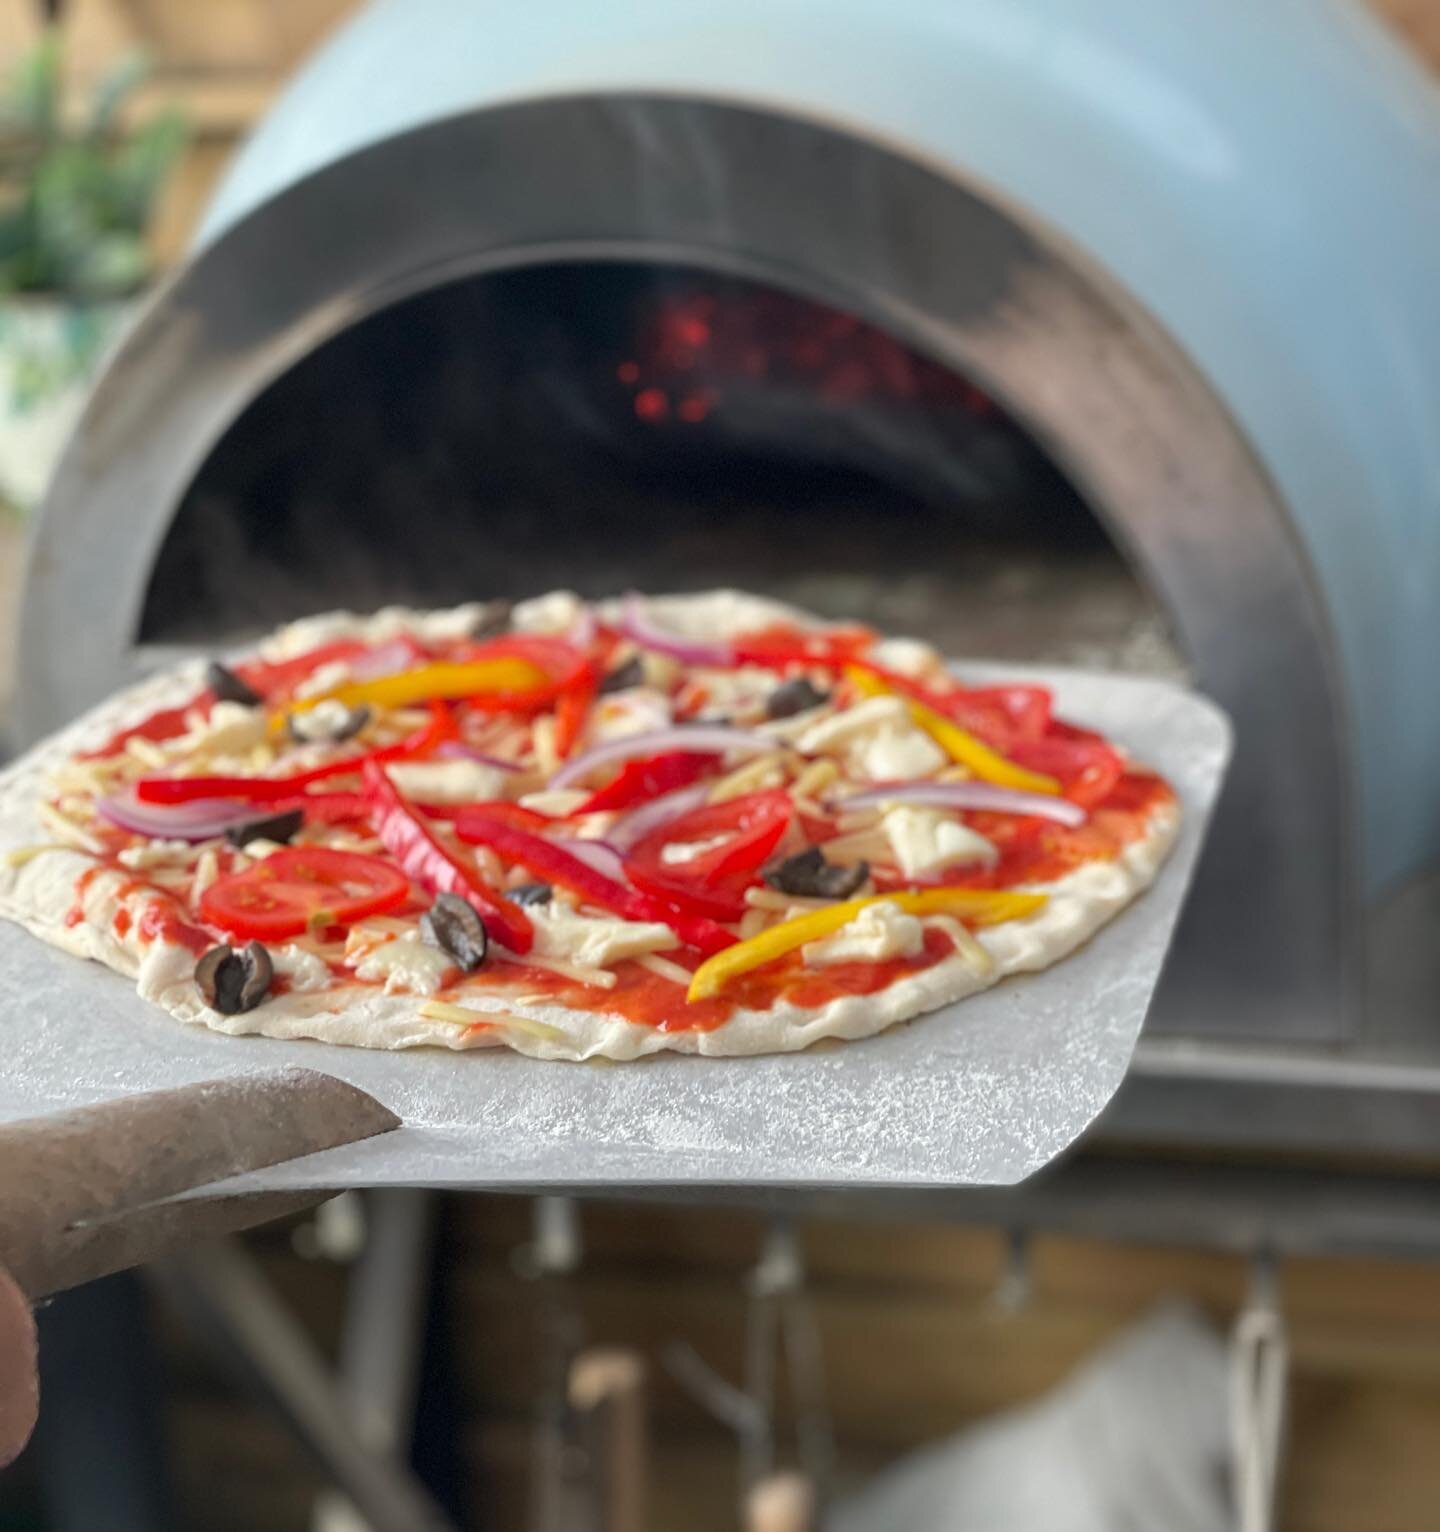 #delivita cooking tonight making Monday night feel even better! 

This really is the very best wood fired oven and the only one we sell! Order now for summer fun!

#pizza #woodfiredoven #delish #family #liveoutdoors #buyonline